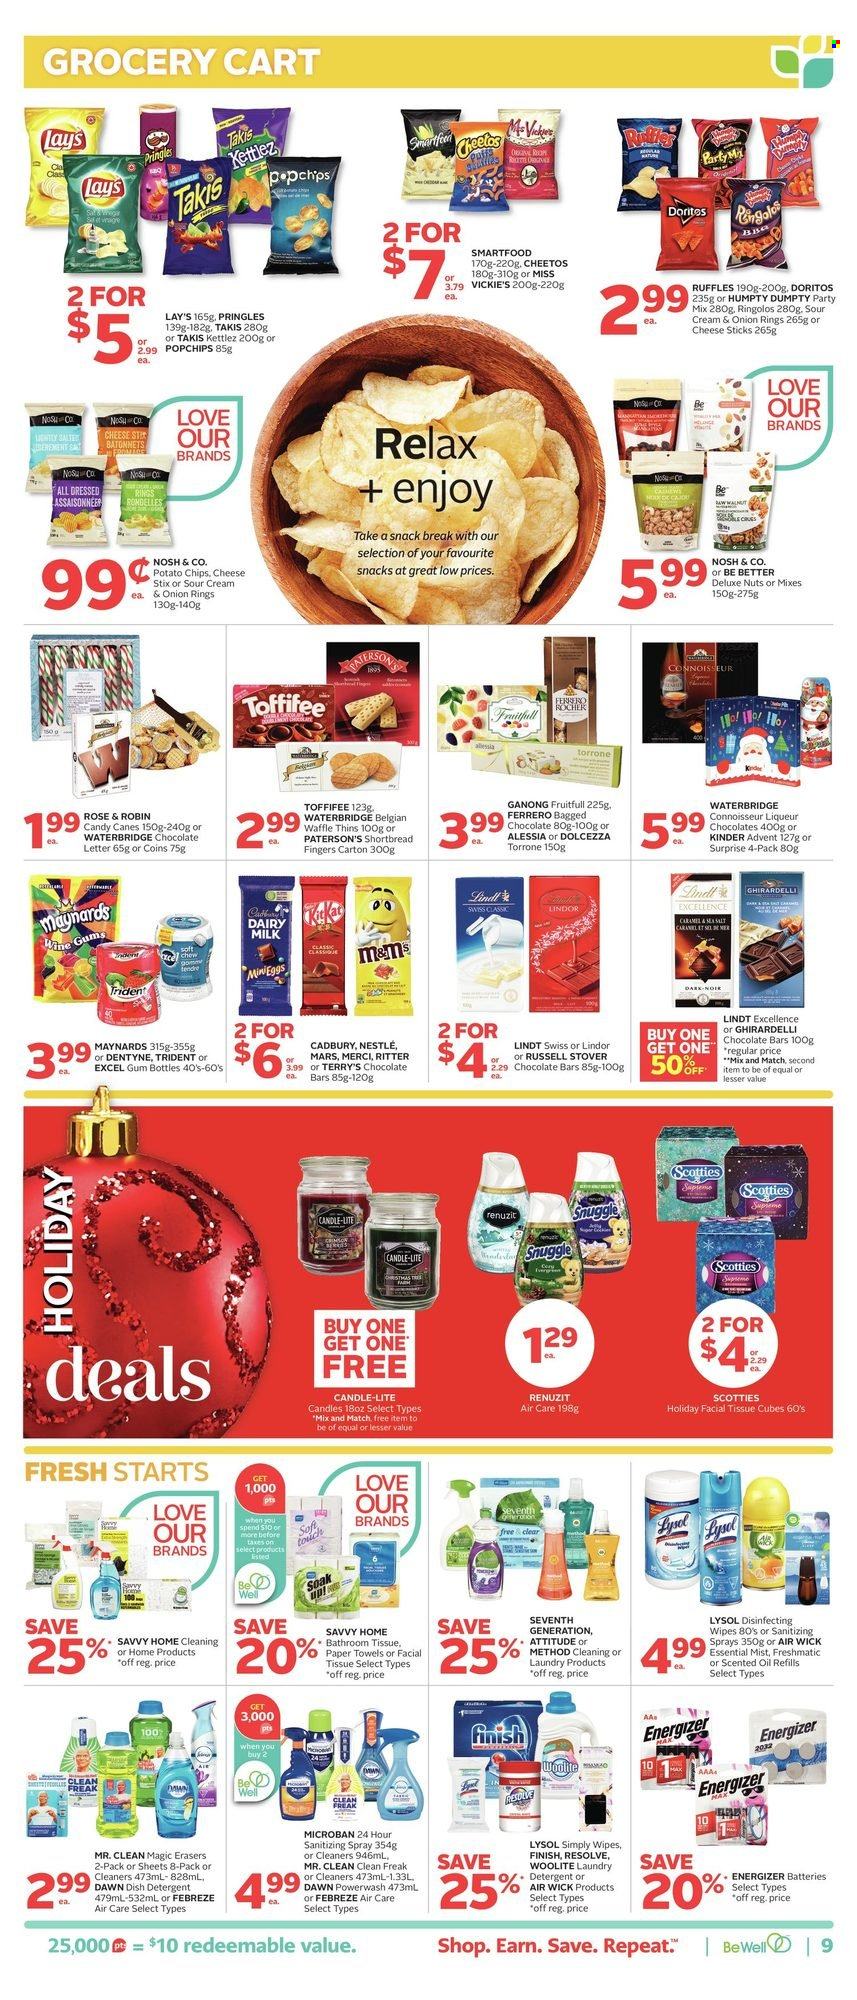 thumbnail - Rexall Flyer - November 26, 2021 - December 02, 2021 - Sales products - Mars, Cadbury, Merci, Dairy Milk, Trident, Ghirardelli, chocolate bar, Doritos, potato chips, Pringles, Cheetos, onion rings, Lay’s, Smartfood, Thins, Ruffles, oil, wine, rosé wine, wipes, bath tissue, kitchen towels, paper towels, Febreze, Lysol, Woolite, Snuggle, candle, Renuzit, Air Wick, scented oil, Nestlé, detergent, Energizer, liqueur, chips, Lindt, Lindor, Ferrero Rocher. Page 12.